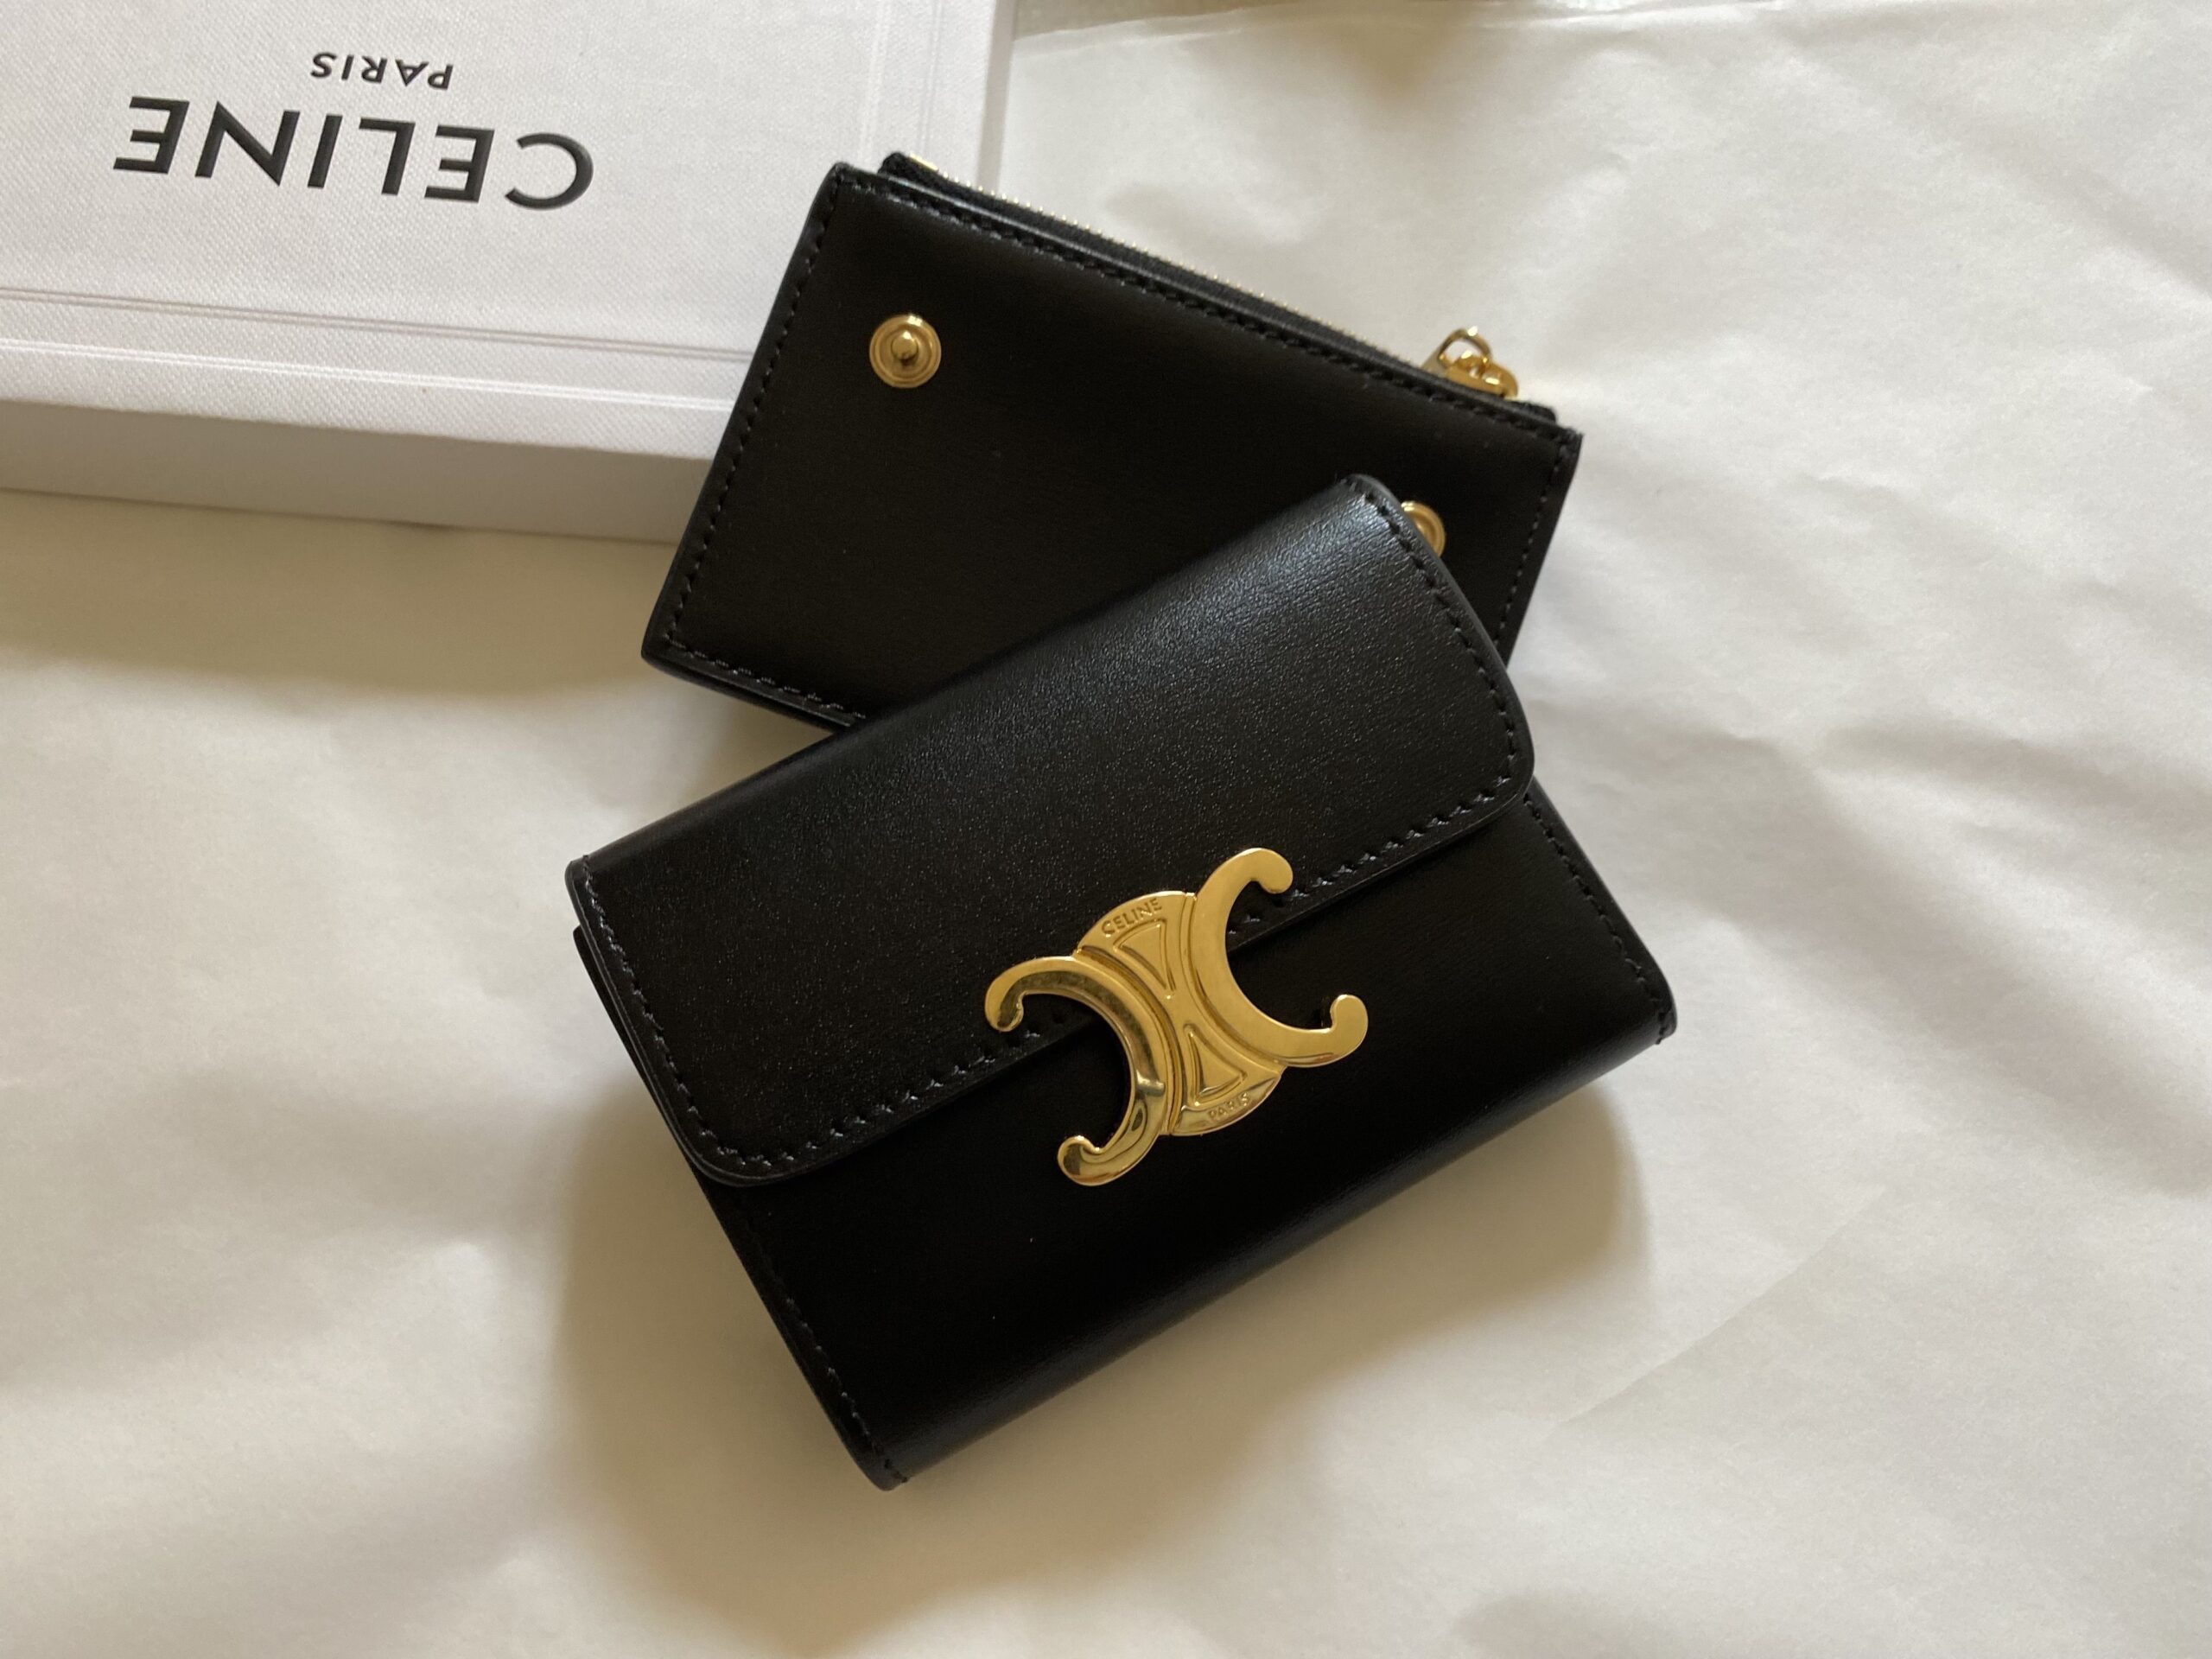 Designer Wallets: Luxury Accessories for Discerning Individuals